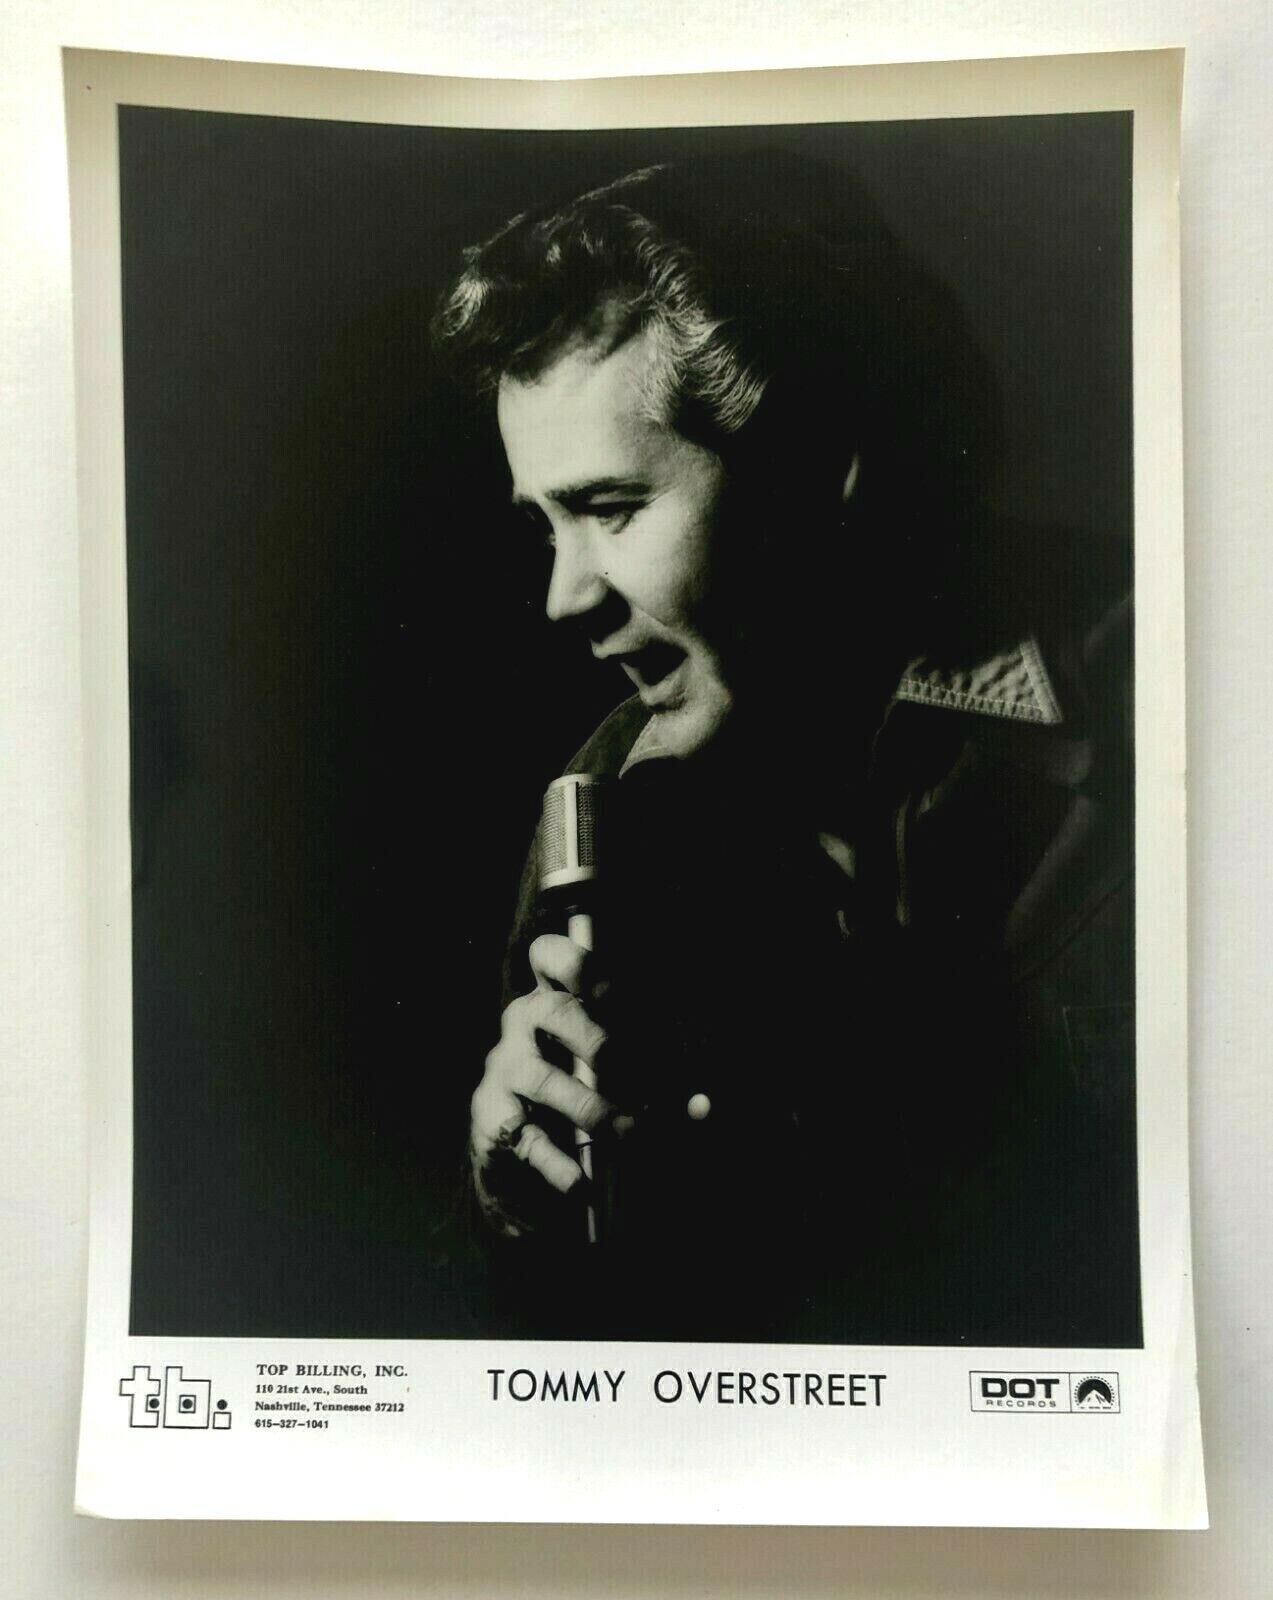 1970s Tommy Overstreet Press Promo Photo Country Music Singer Songwriter T.O.